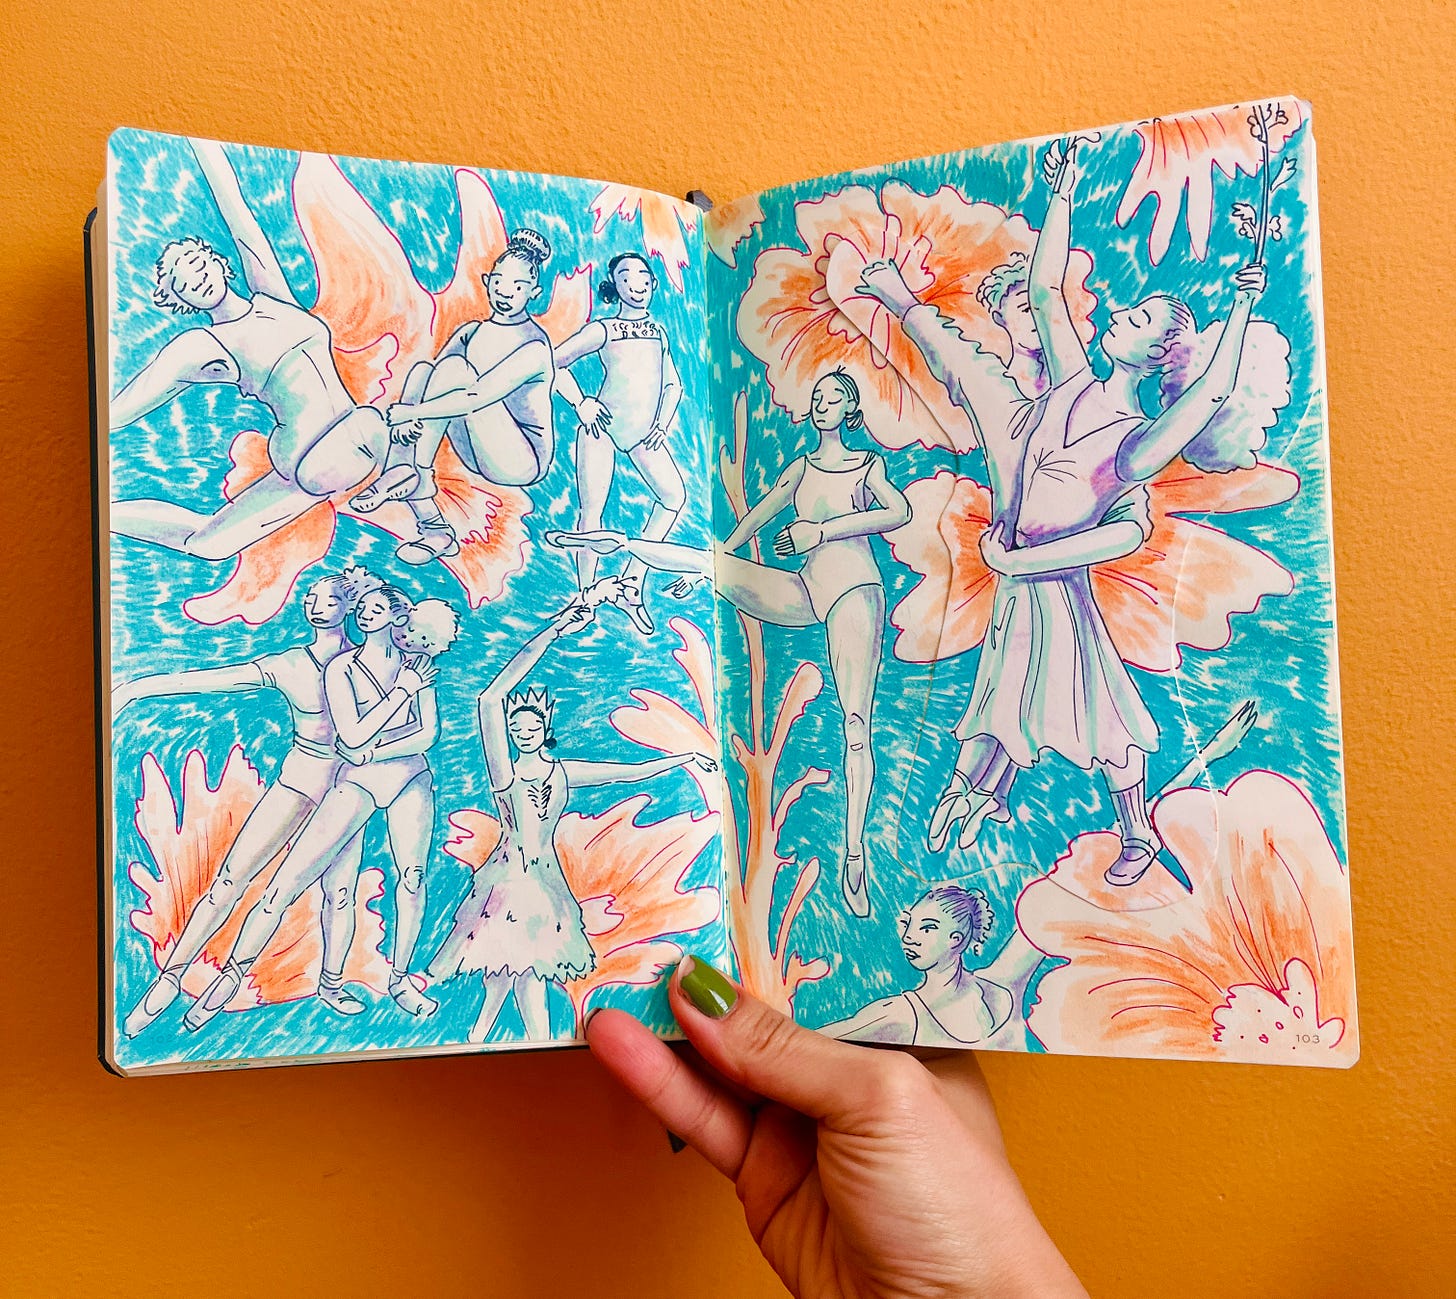 A vibrant two-page spread of ballerinas drawn with pen, marker, and colored pencils.